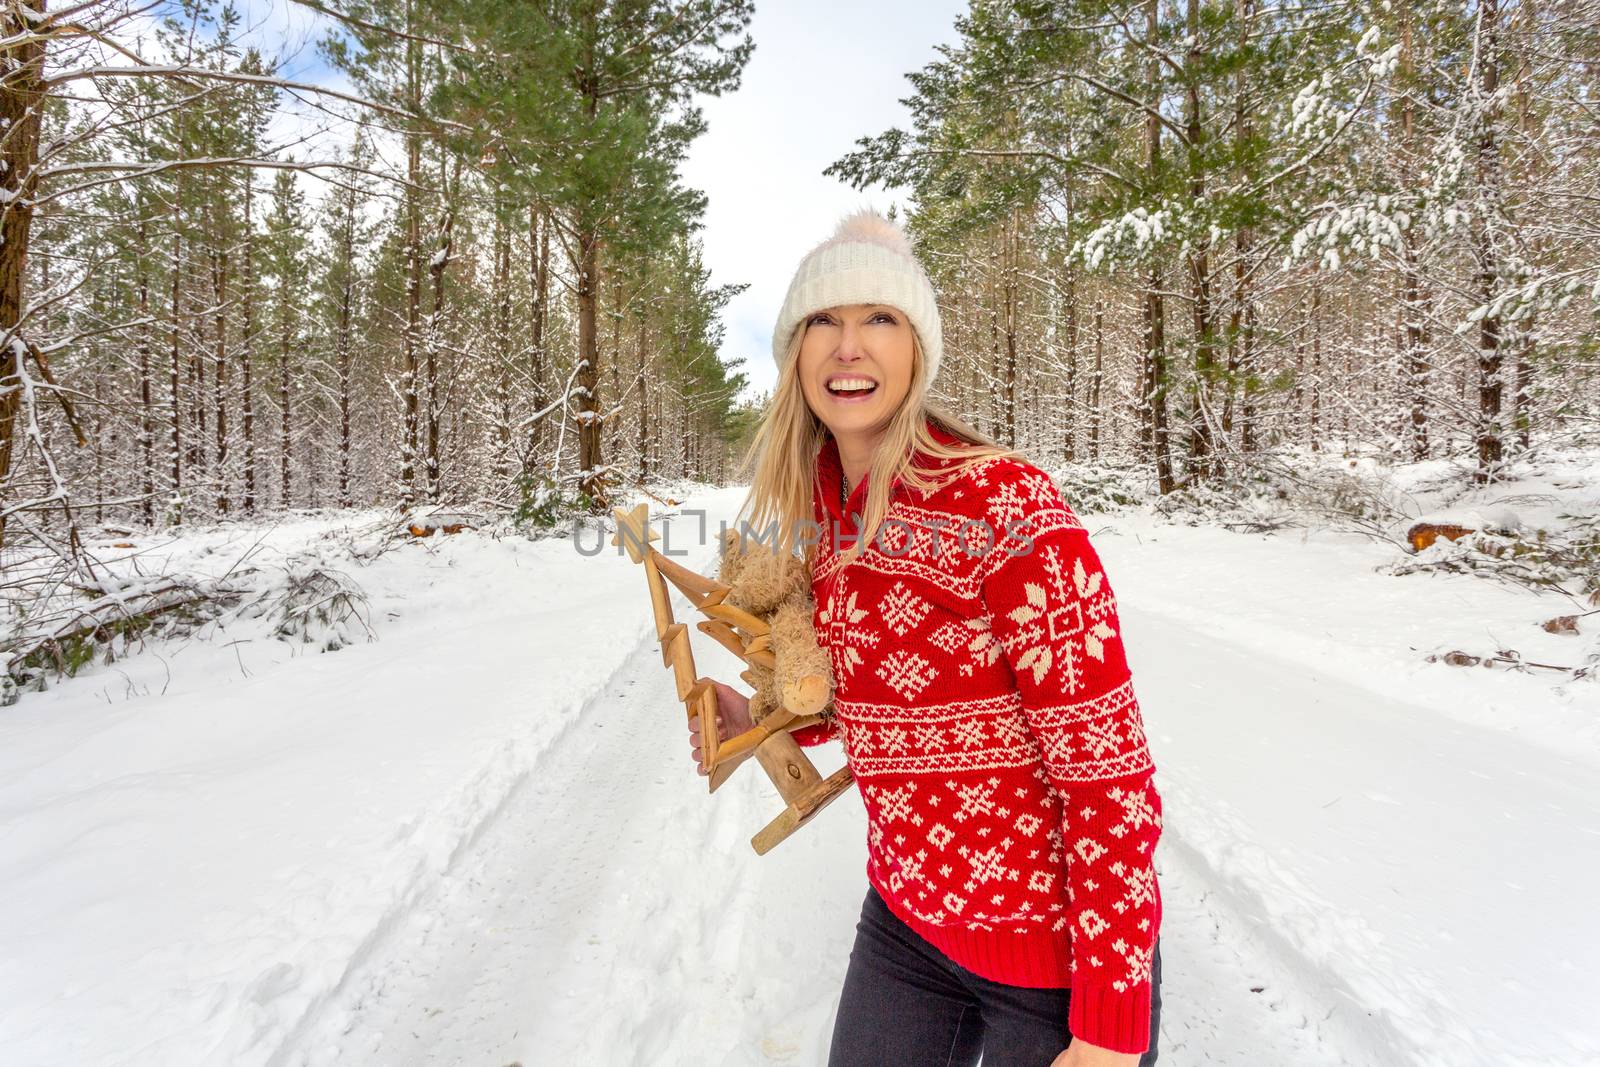 Happy cheerful woman on a snow covered road at Christmas time through tall pine trees covered in snow.  She has a cheerful expression and wearing a red jumper with snowflakes on it.